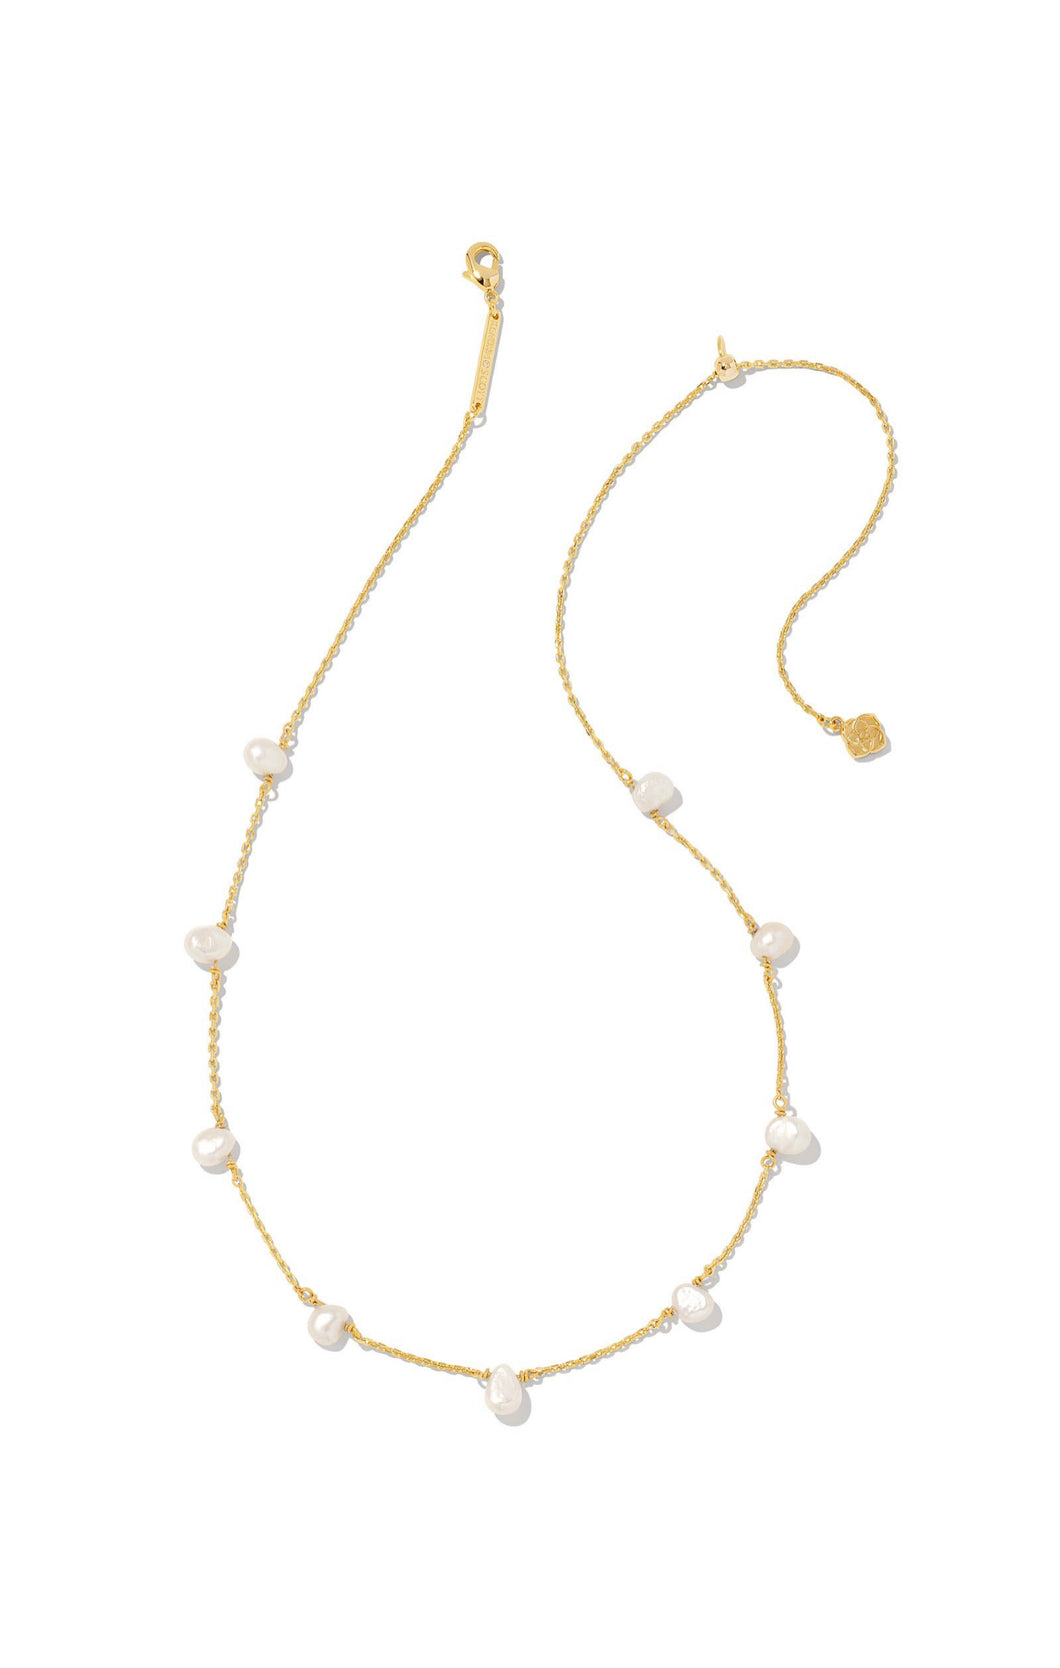 Kendra Scott: Leighton Pearl Strand Necklace in Gold